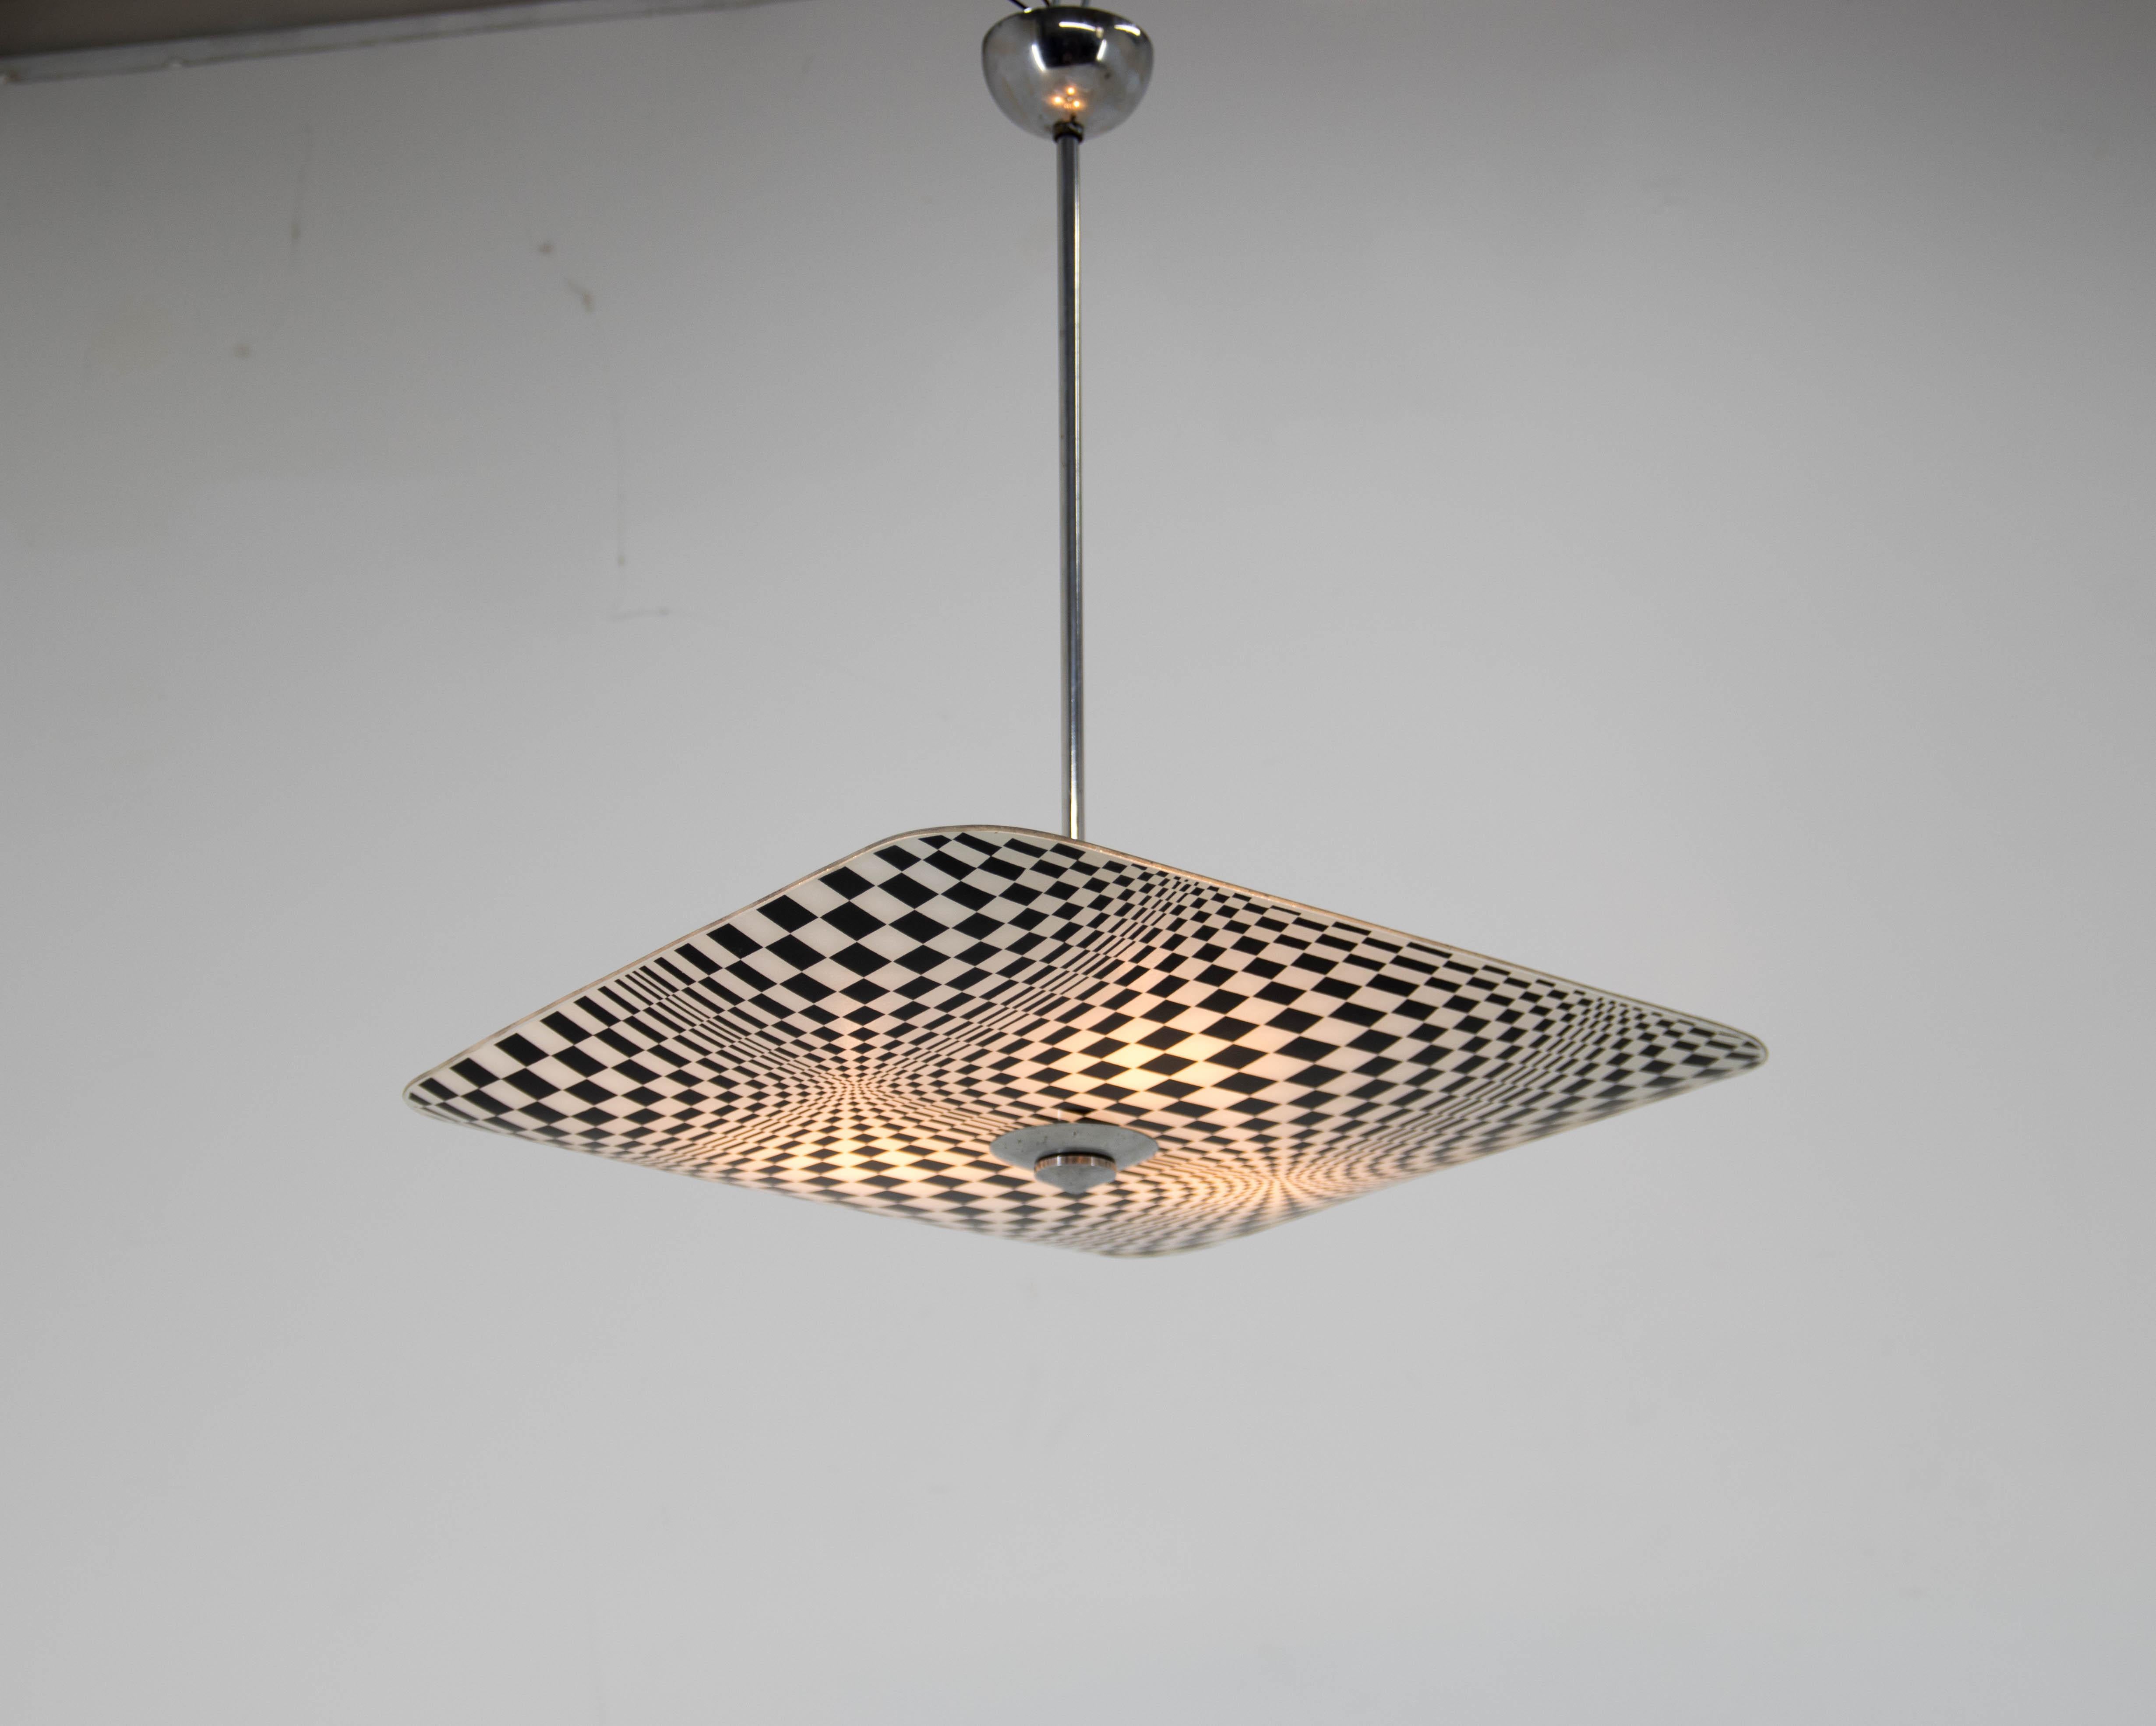 Glass pendant with interesting black and white pattern.
Rewired: 3x60W, E25-E27 bulbs
US wiring compatible.